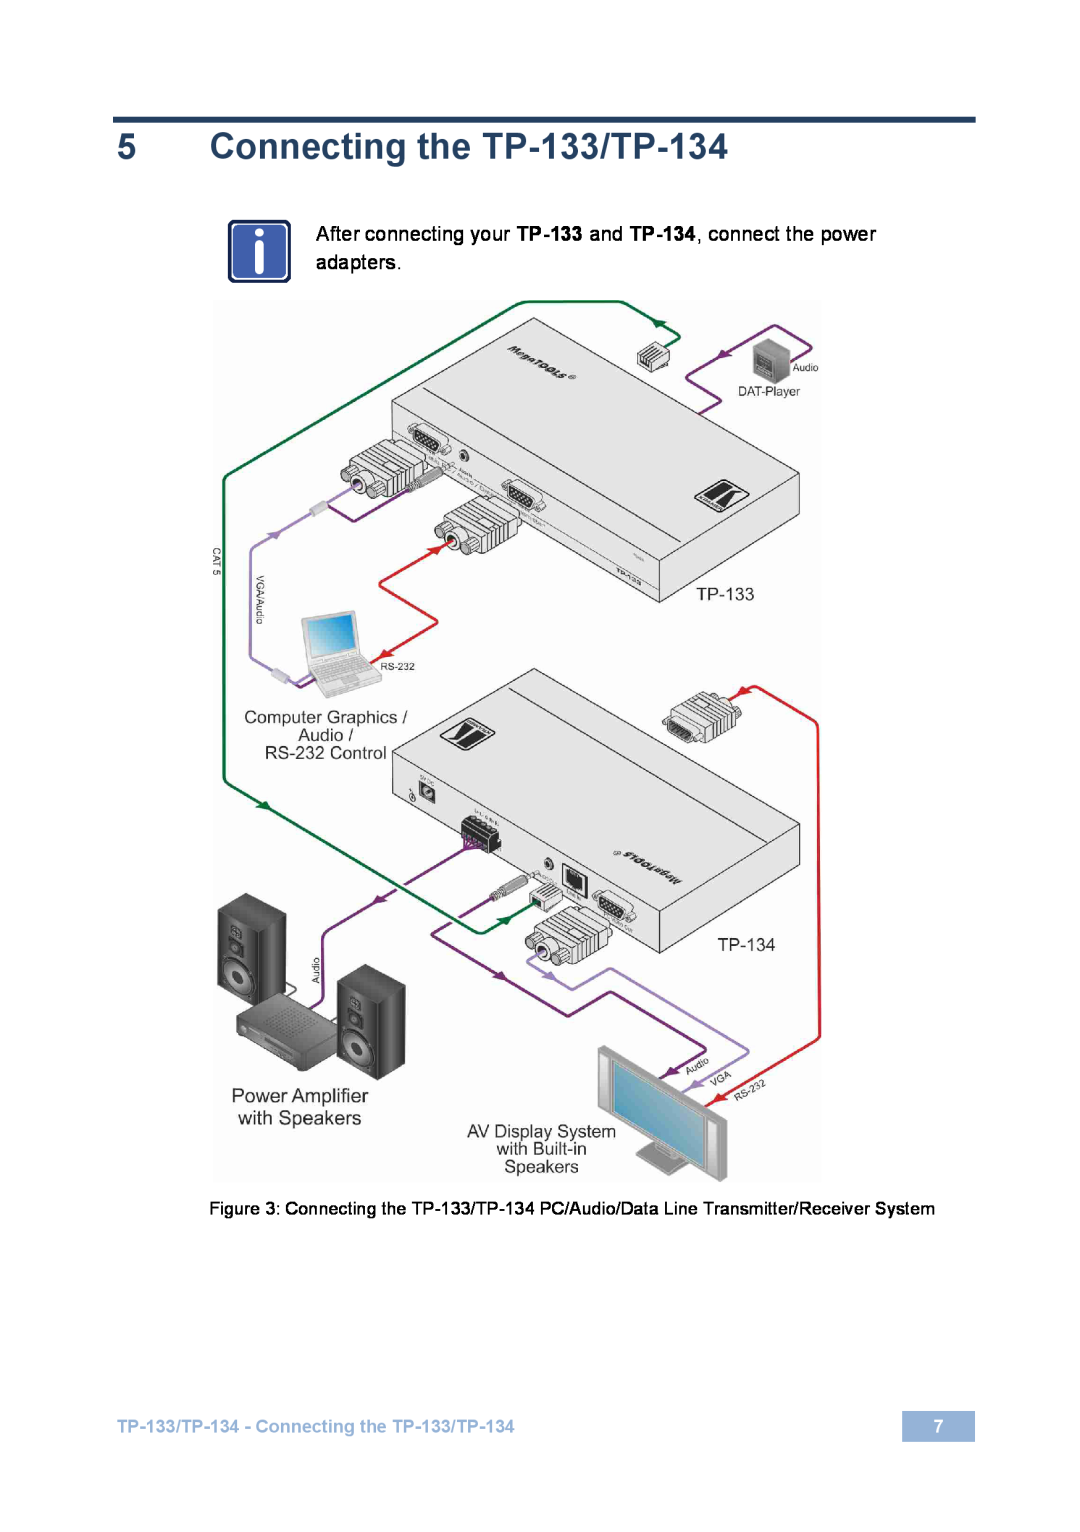 Kramer Electronics user manual adapters, TP-133/TP-134- Connecting the TP-133/TP-134 